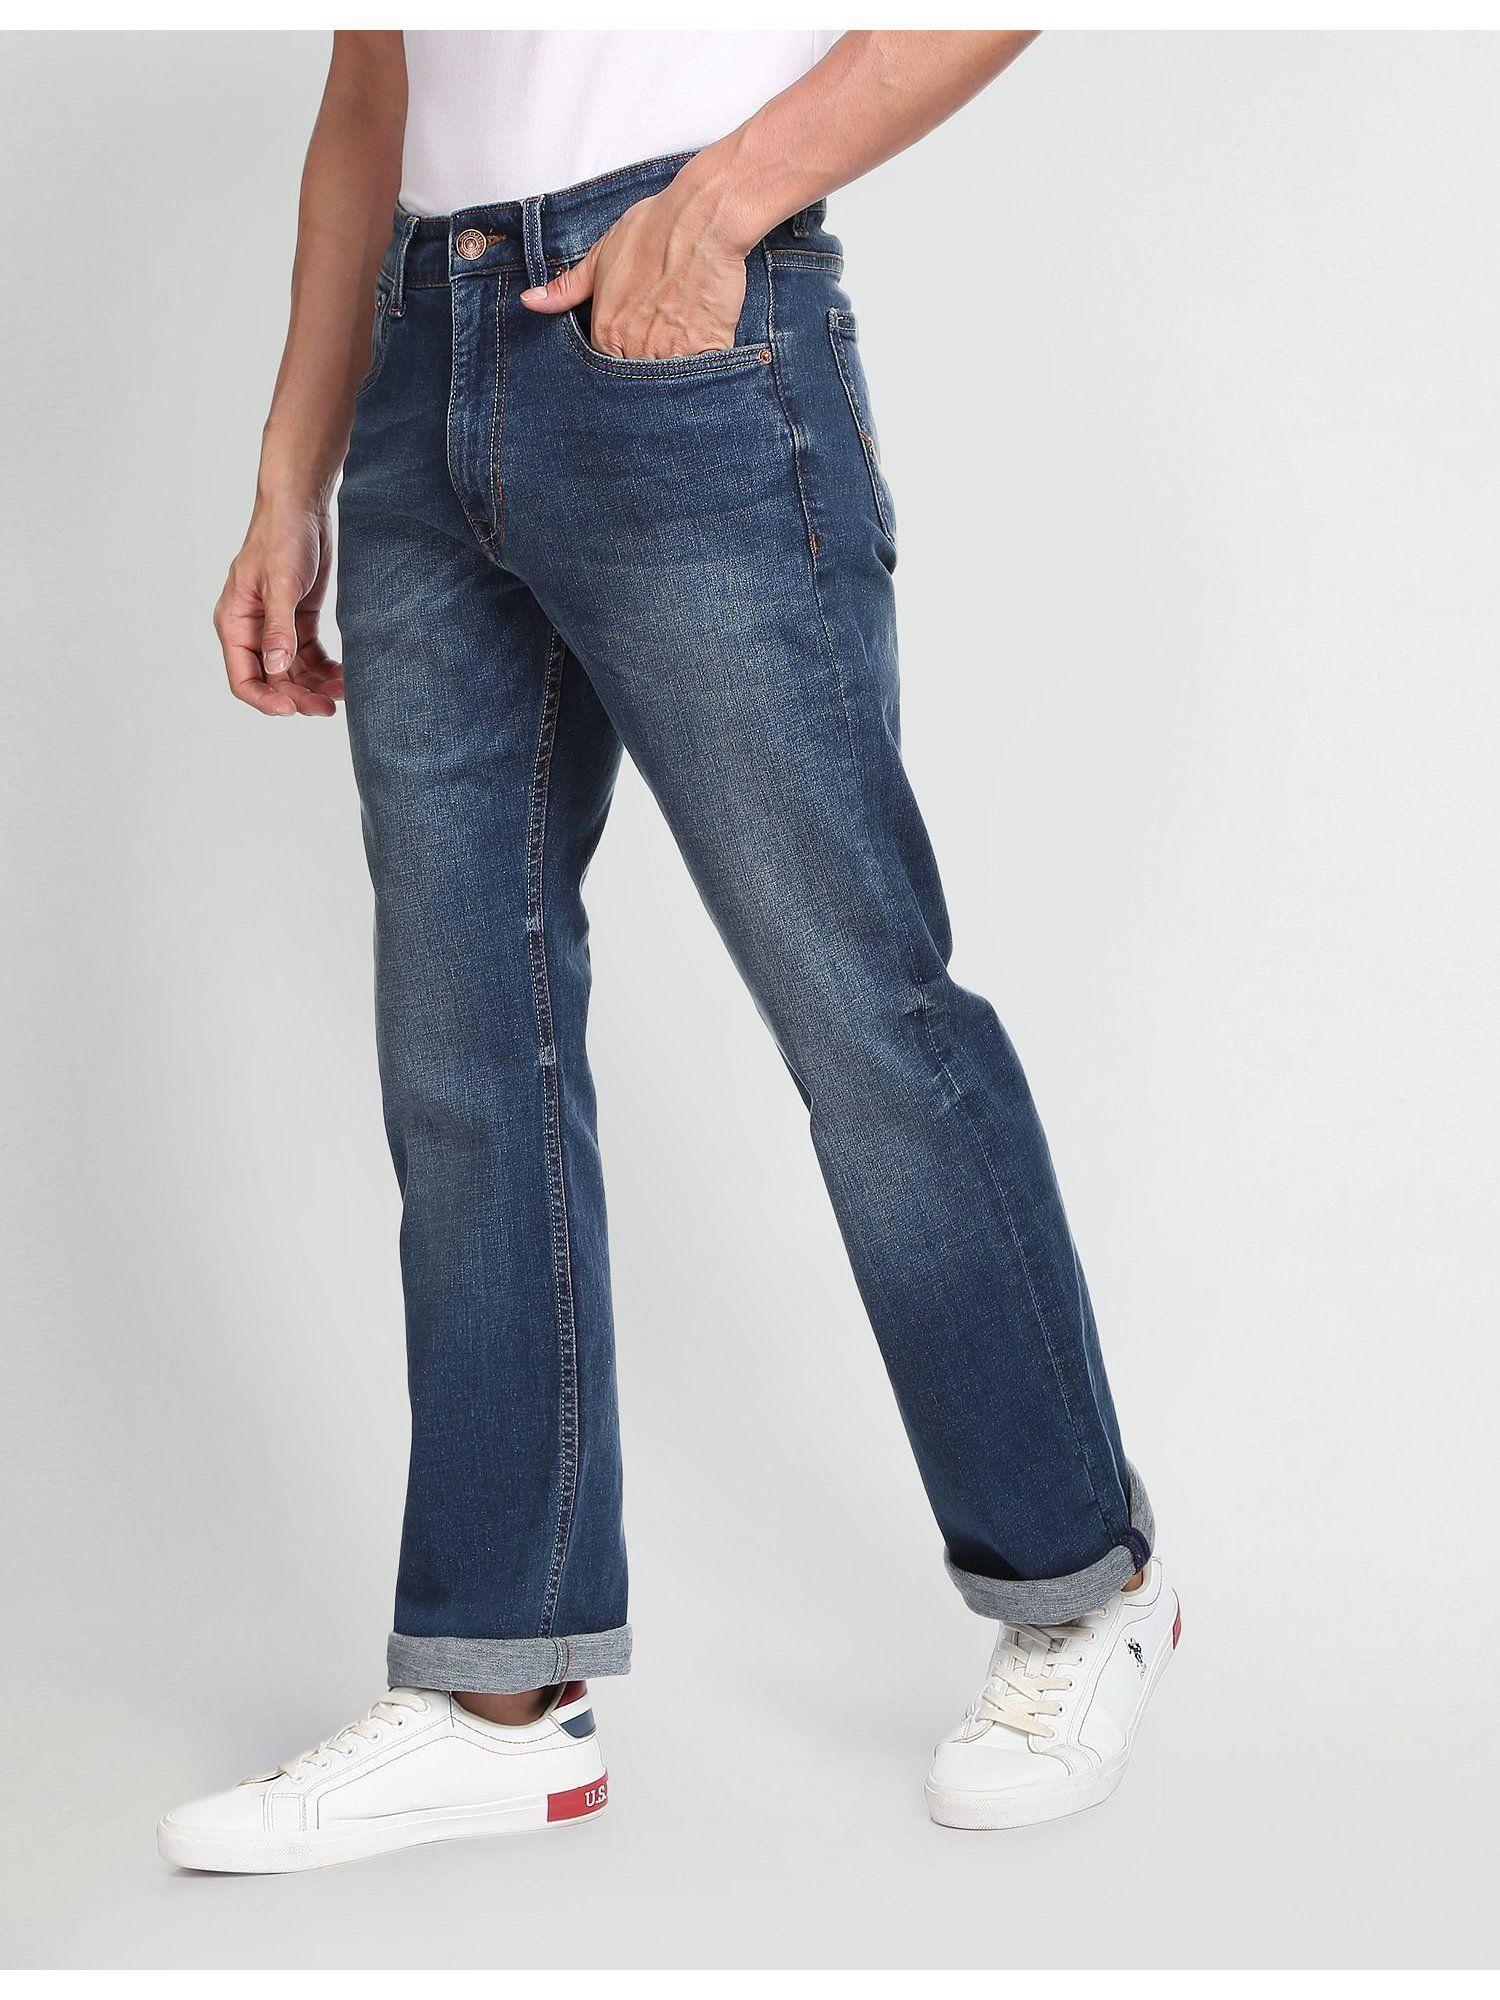 connor bootcut authentic jeans